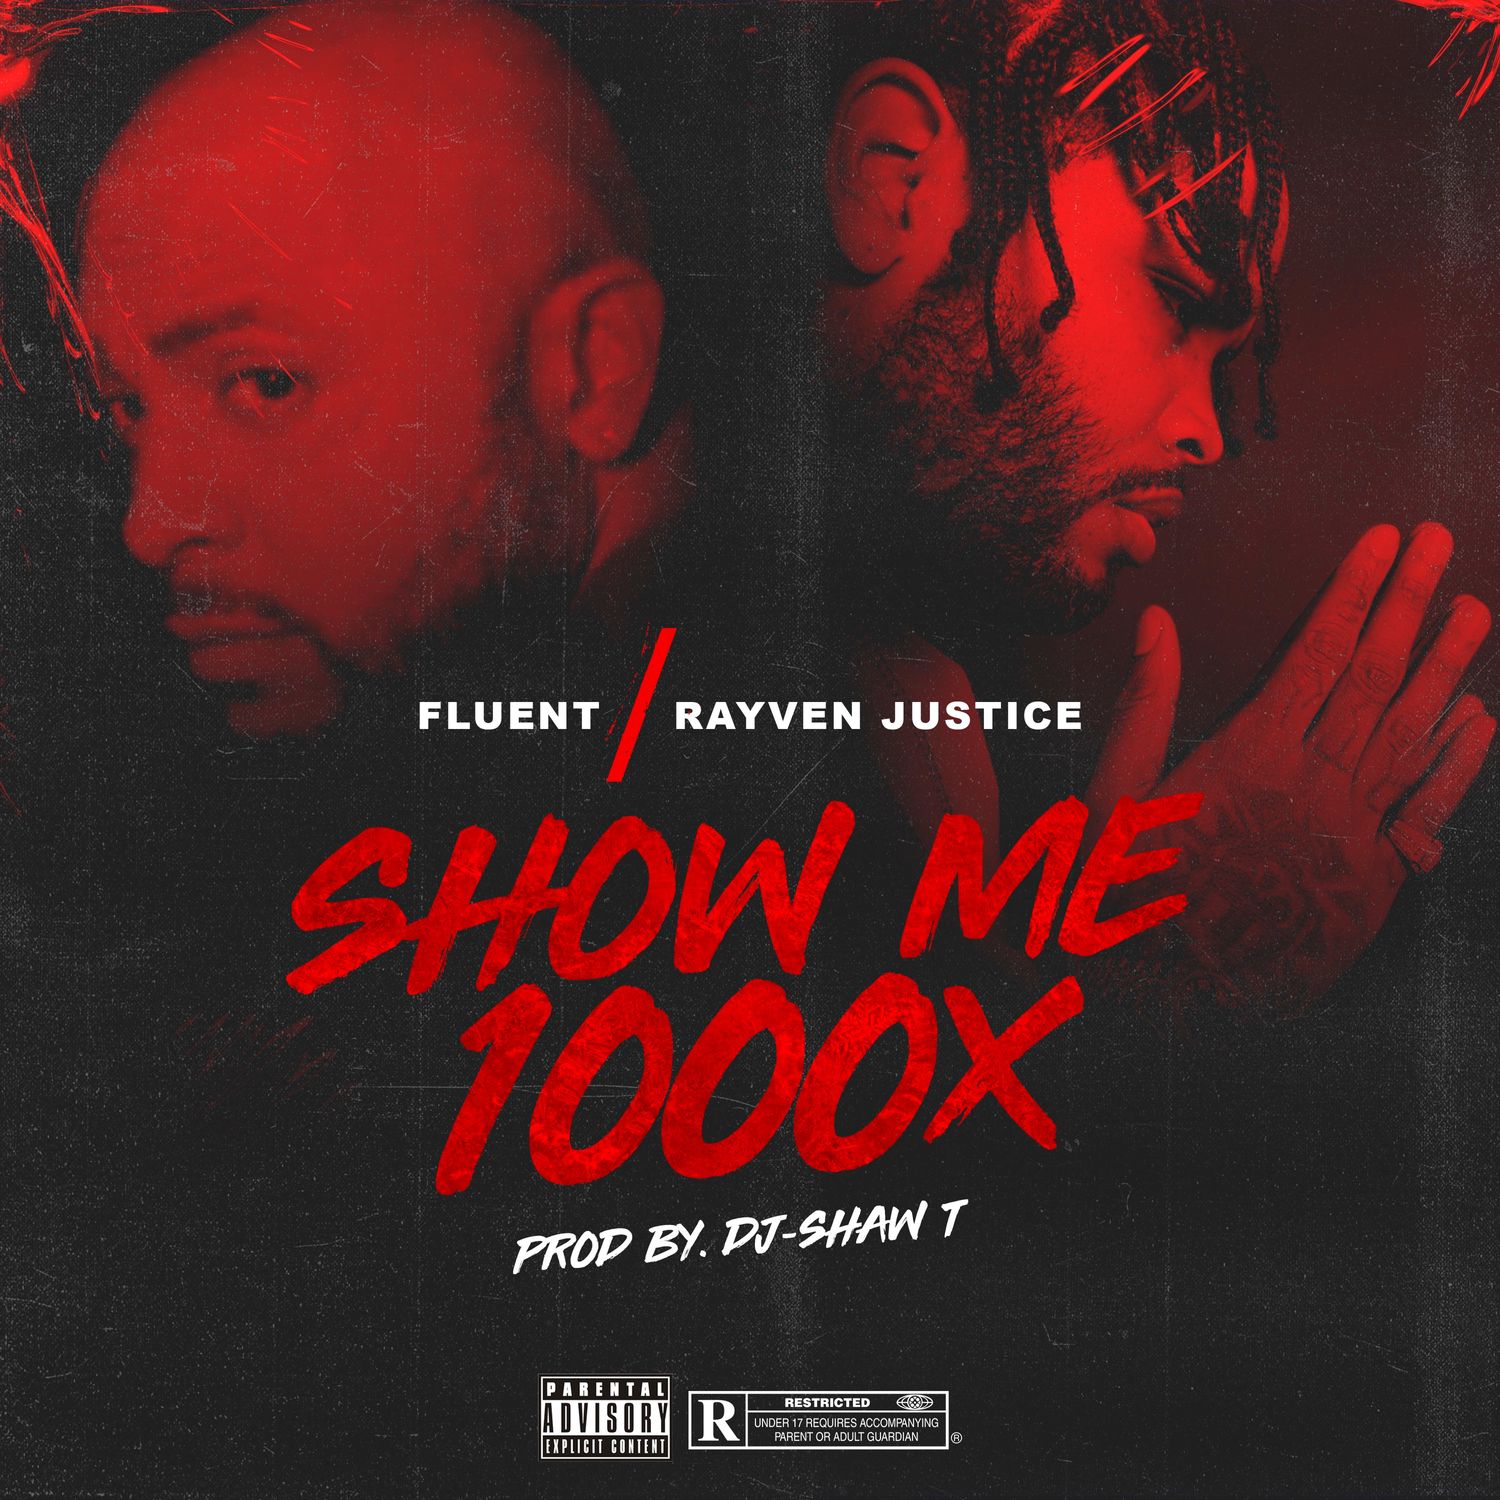 [Single] Fluent & Rayven Justice ‘Show Me 1000x’